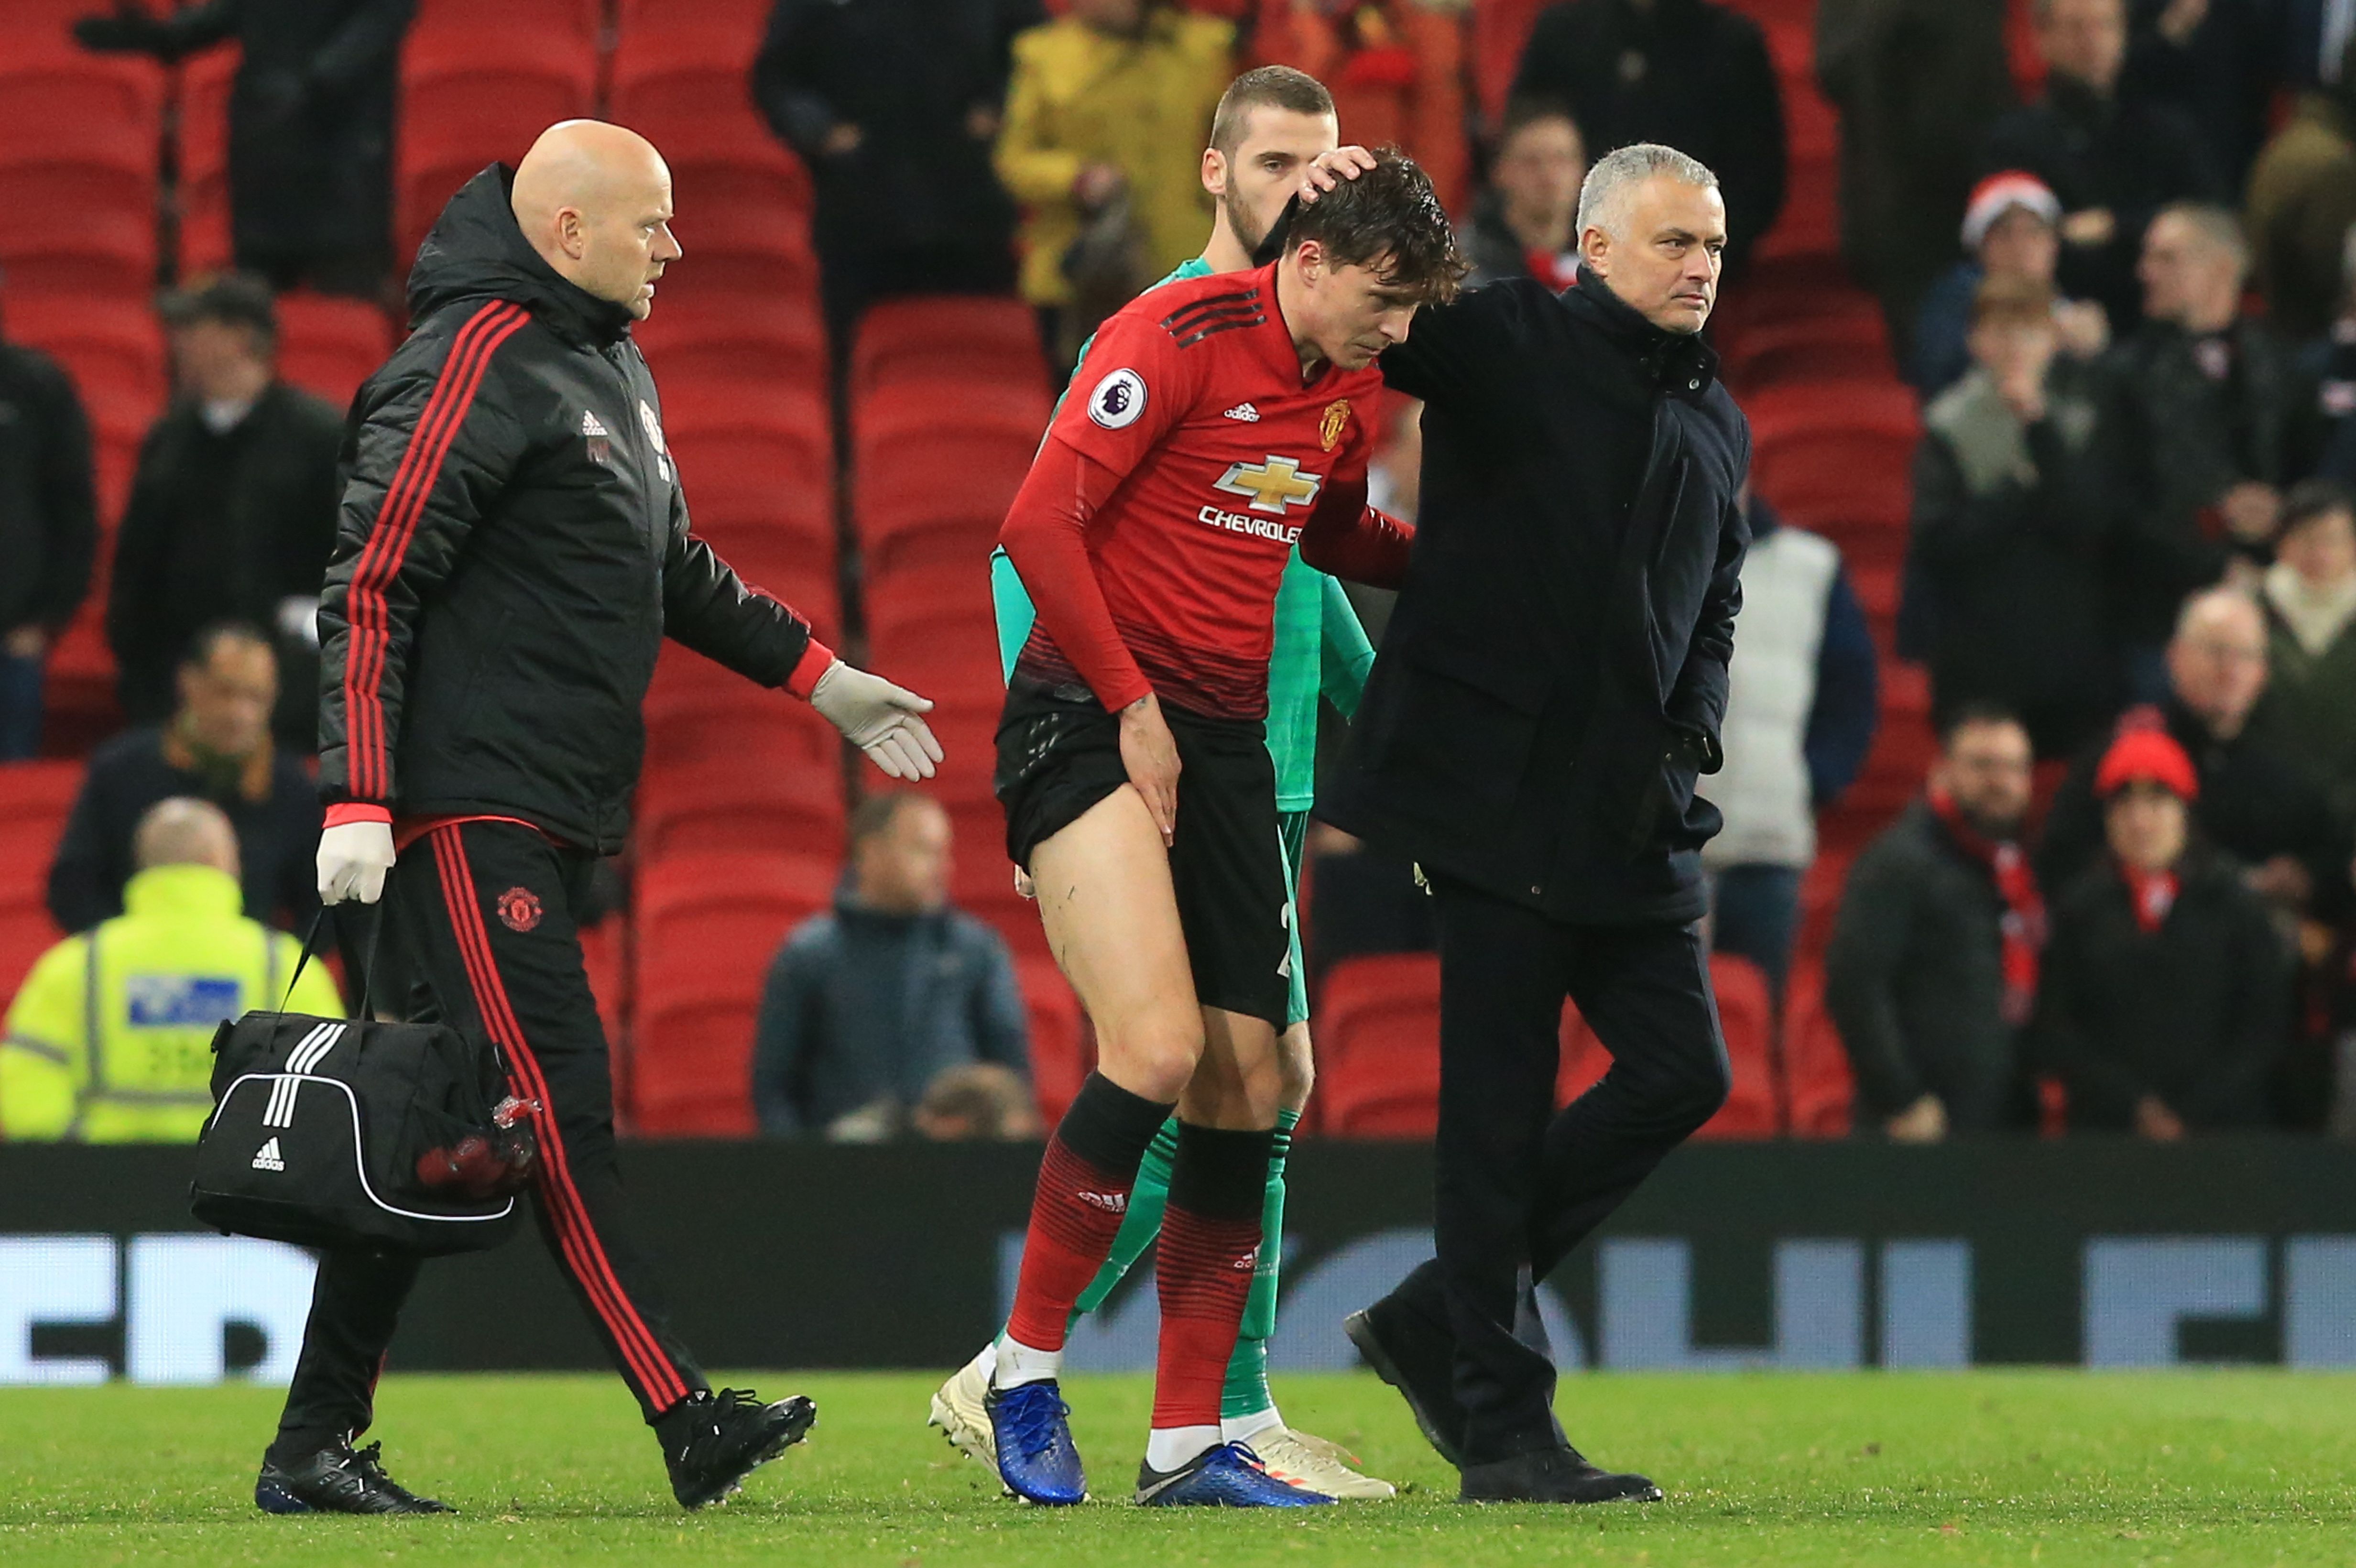 Manchester United's Portuguese manager Jose Mourinho (R) consoles Manchester United's Swedish defender Victor Lindelof (C) during the English Premier League football match between Manchester United and Crystal Palace at Old Trafford in Manchester, north west England, on November 24, 2018. (Photo by Lindsey PARNABY / AFP) / RESTRICTED TO EDITORIAL USE. No use with unauthorized audio, video, data, fixture lists, club/league logos or 'live' services. Online in-match use limited to 120 images. An additional 40 images may be used in extra time. No video emulation. Social media in-match use limited to 120 images. An additional 40 images may be used in extra time. No use in betting publications, games or single club/league/player publications. /         (Photo credit should read LINDSEY PARNABY/AFP/Getty Images)